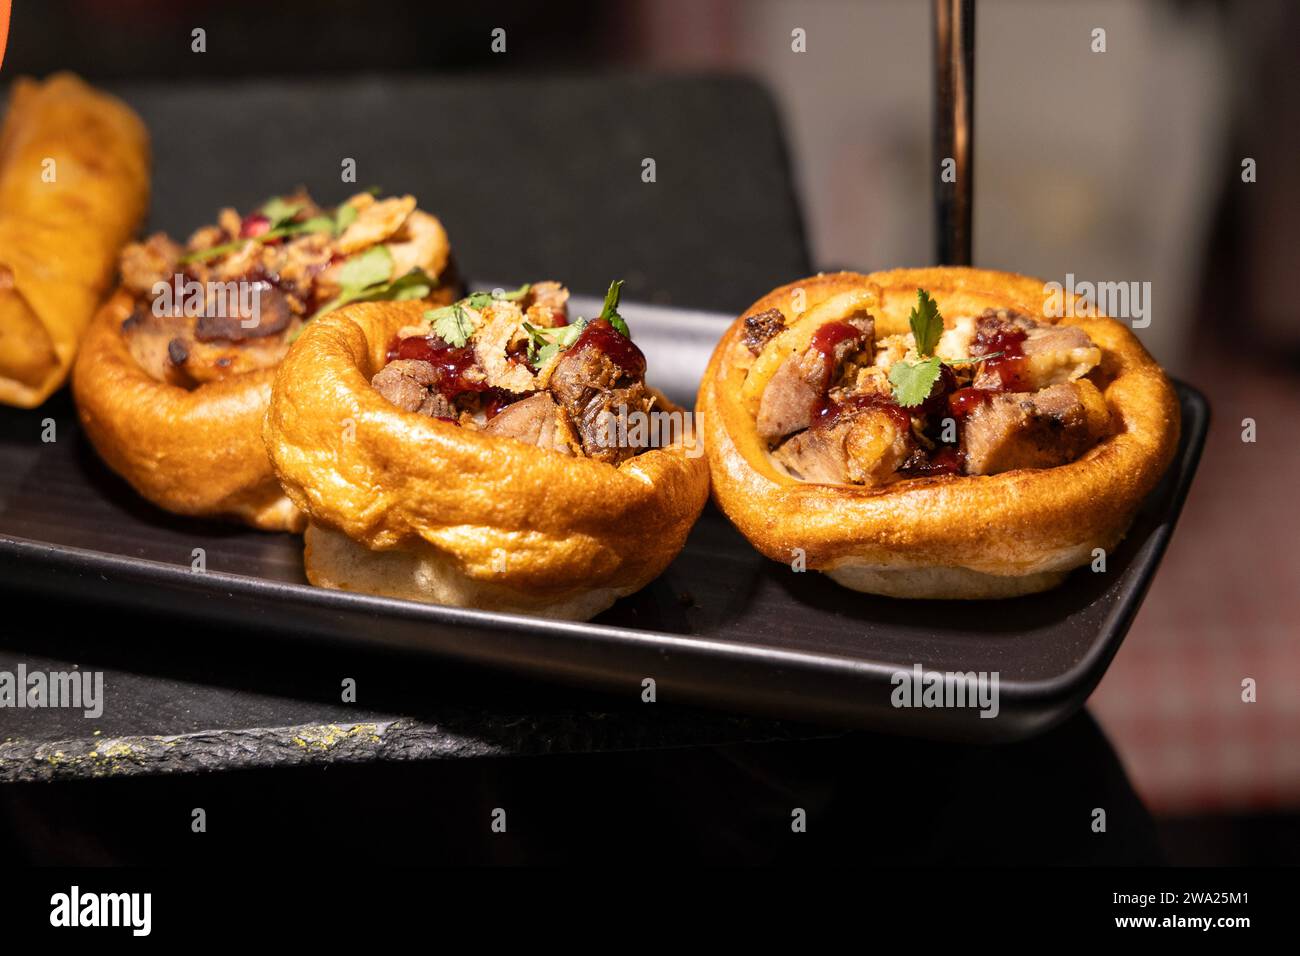 Christmas duck yorkshire puddings at the Southbank Centre Food Market, London, England Stock Photo